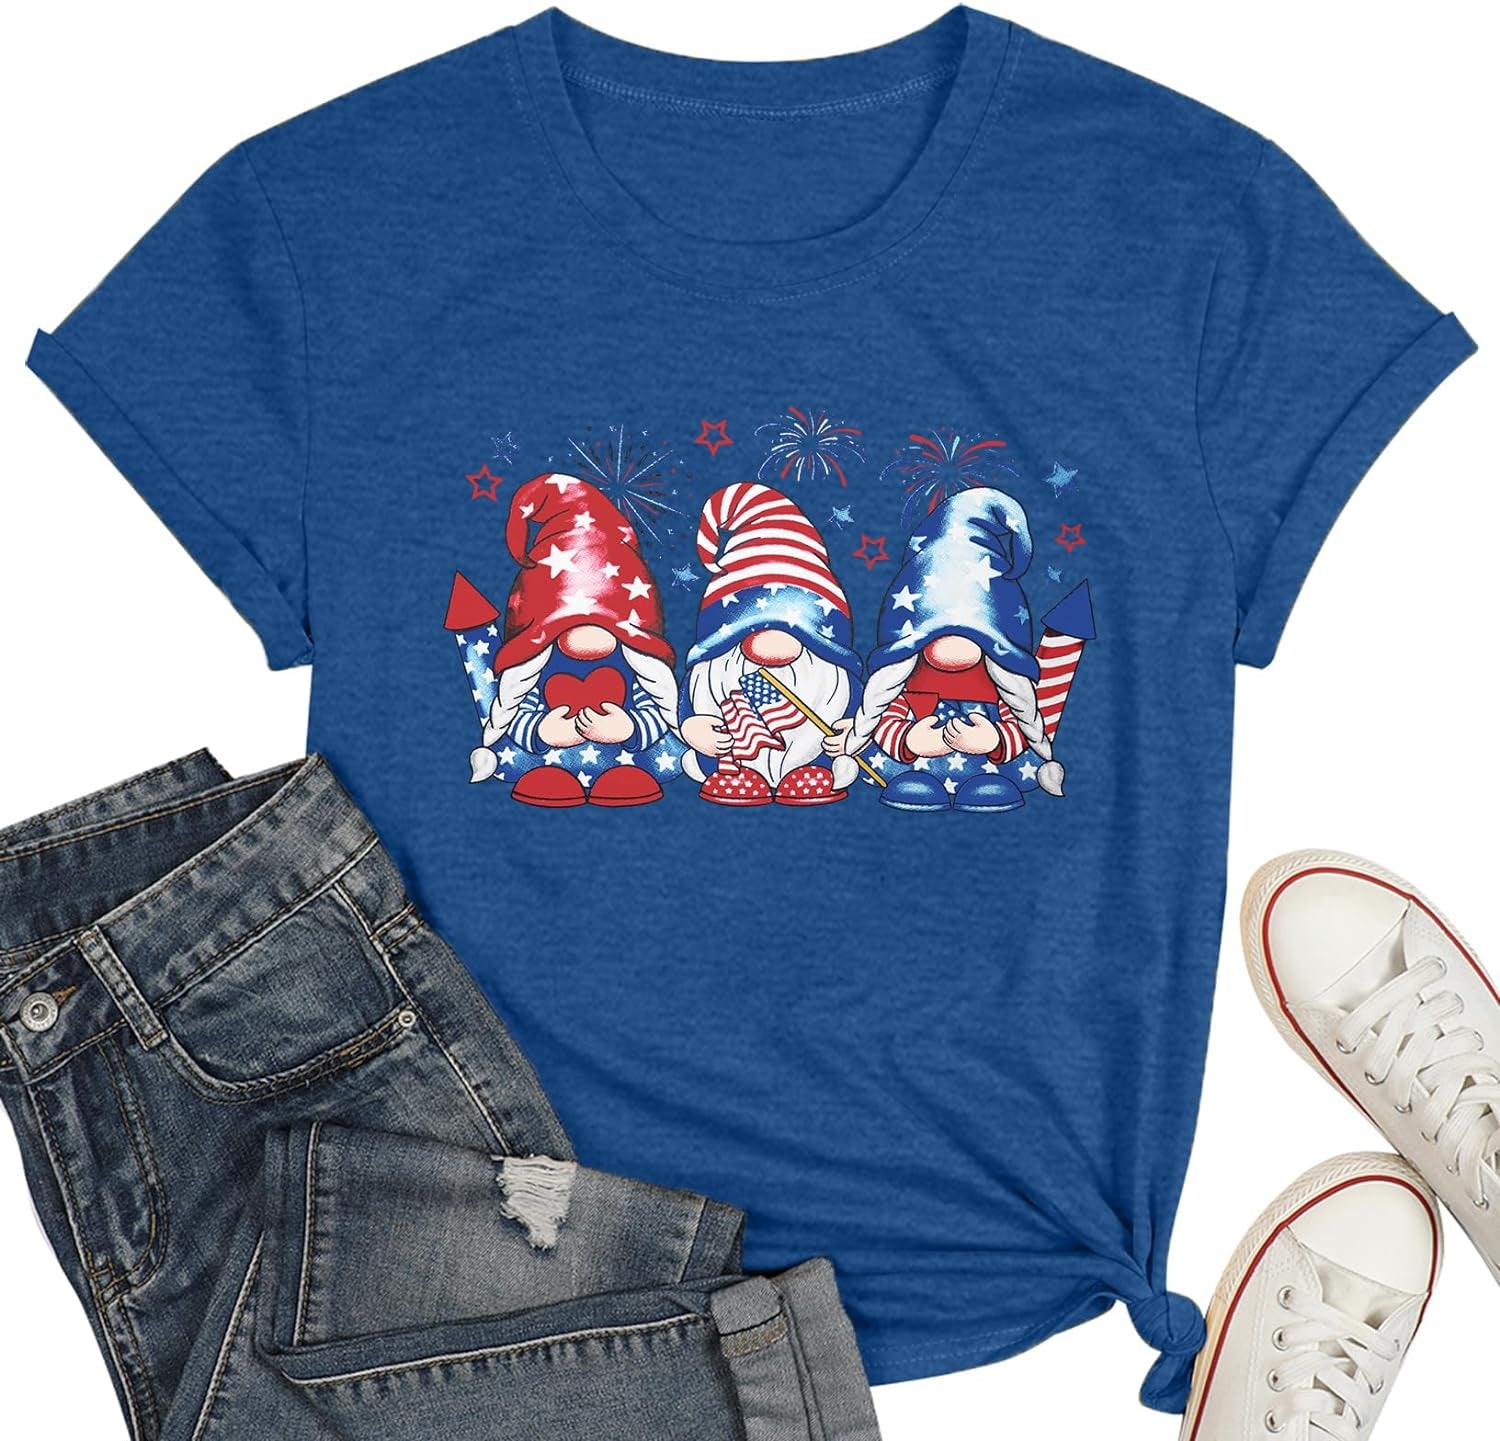 4Th of July Gnomes Shirt for Womens Funny Patriotic Graphic Tee Shirt USA Flag Stars Stripes Tee Tops